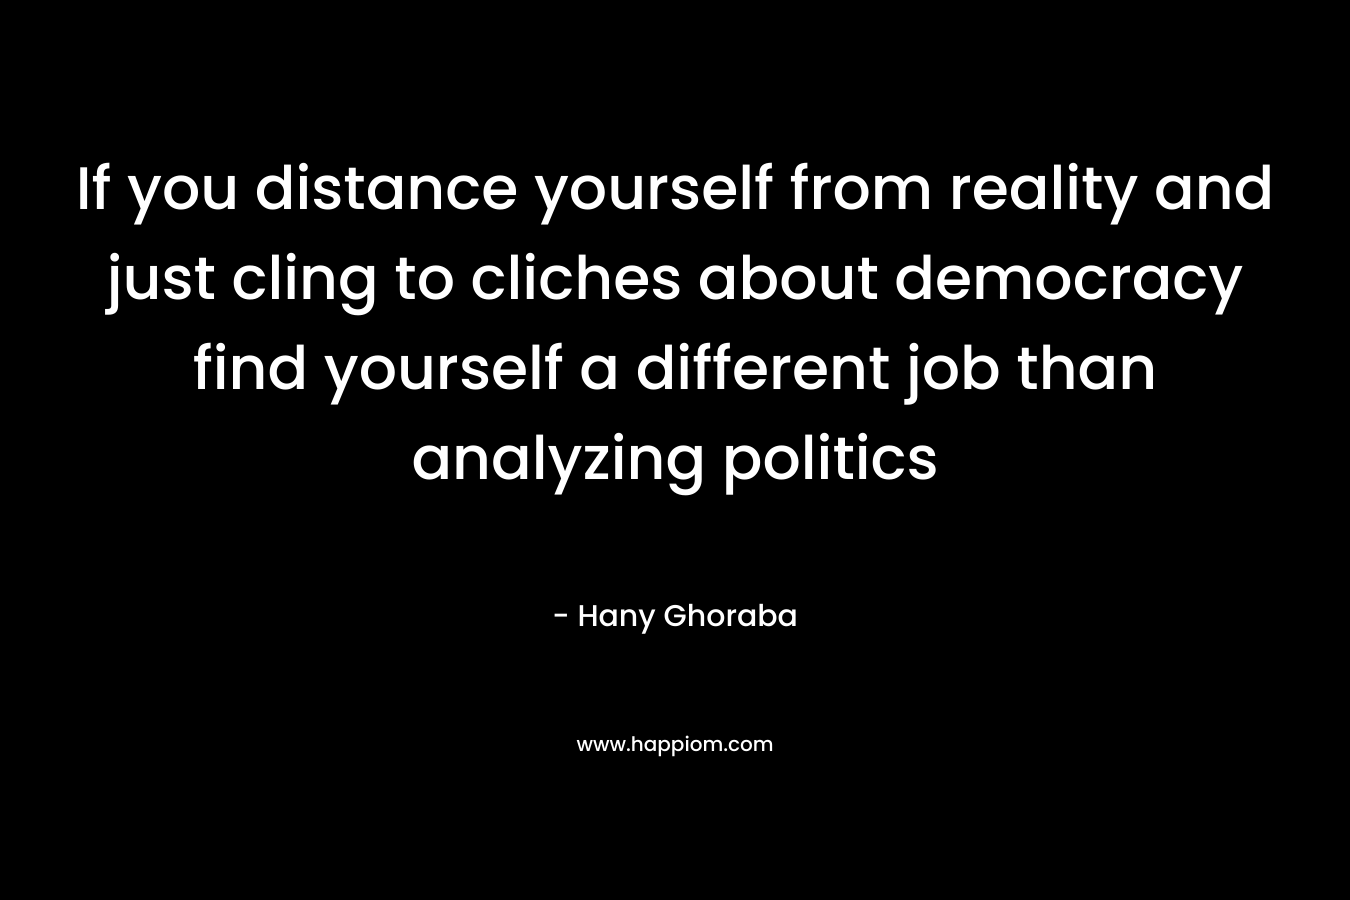 If you distance yourself from reality and just cling to cliches about democracy find yourself a different job than analyzing politics